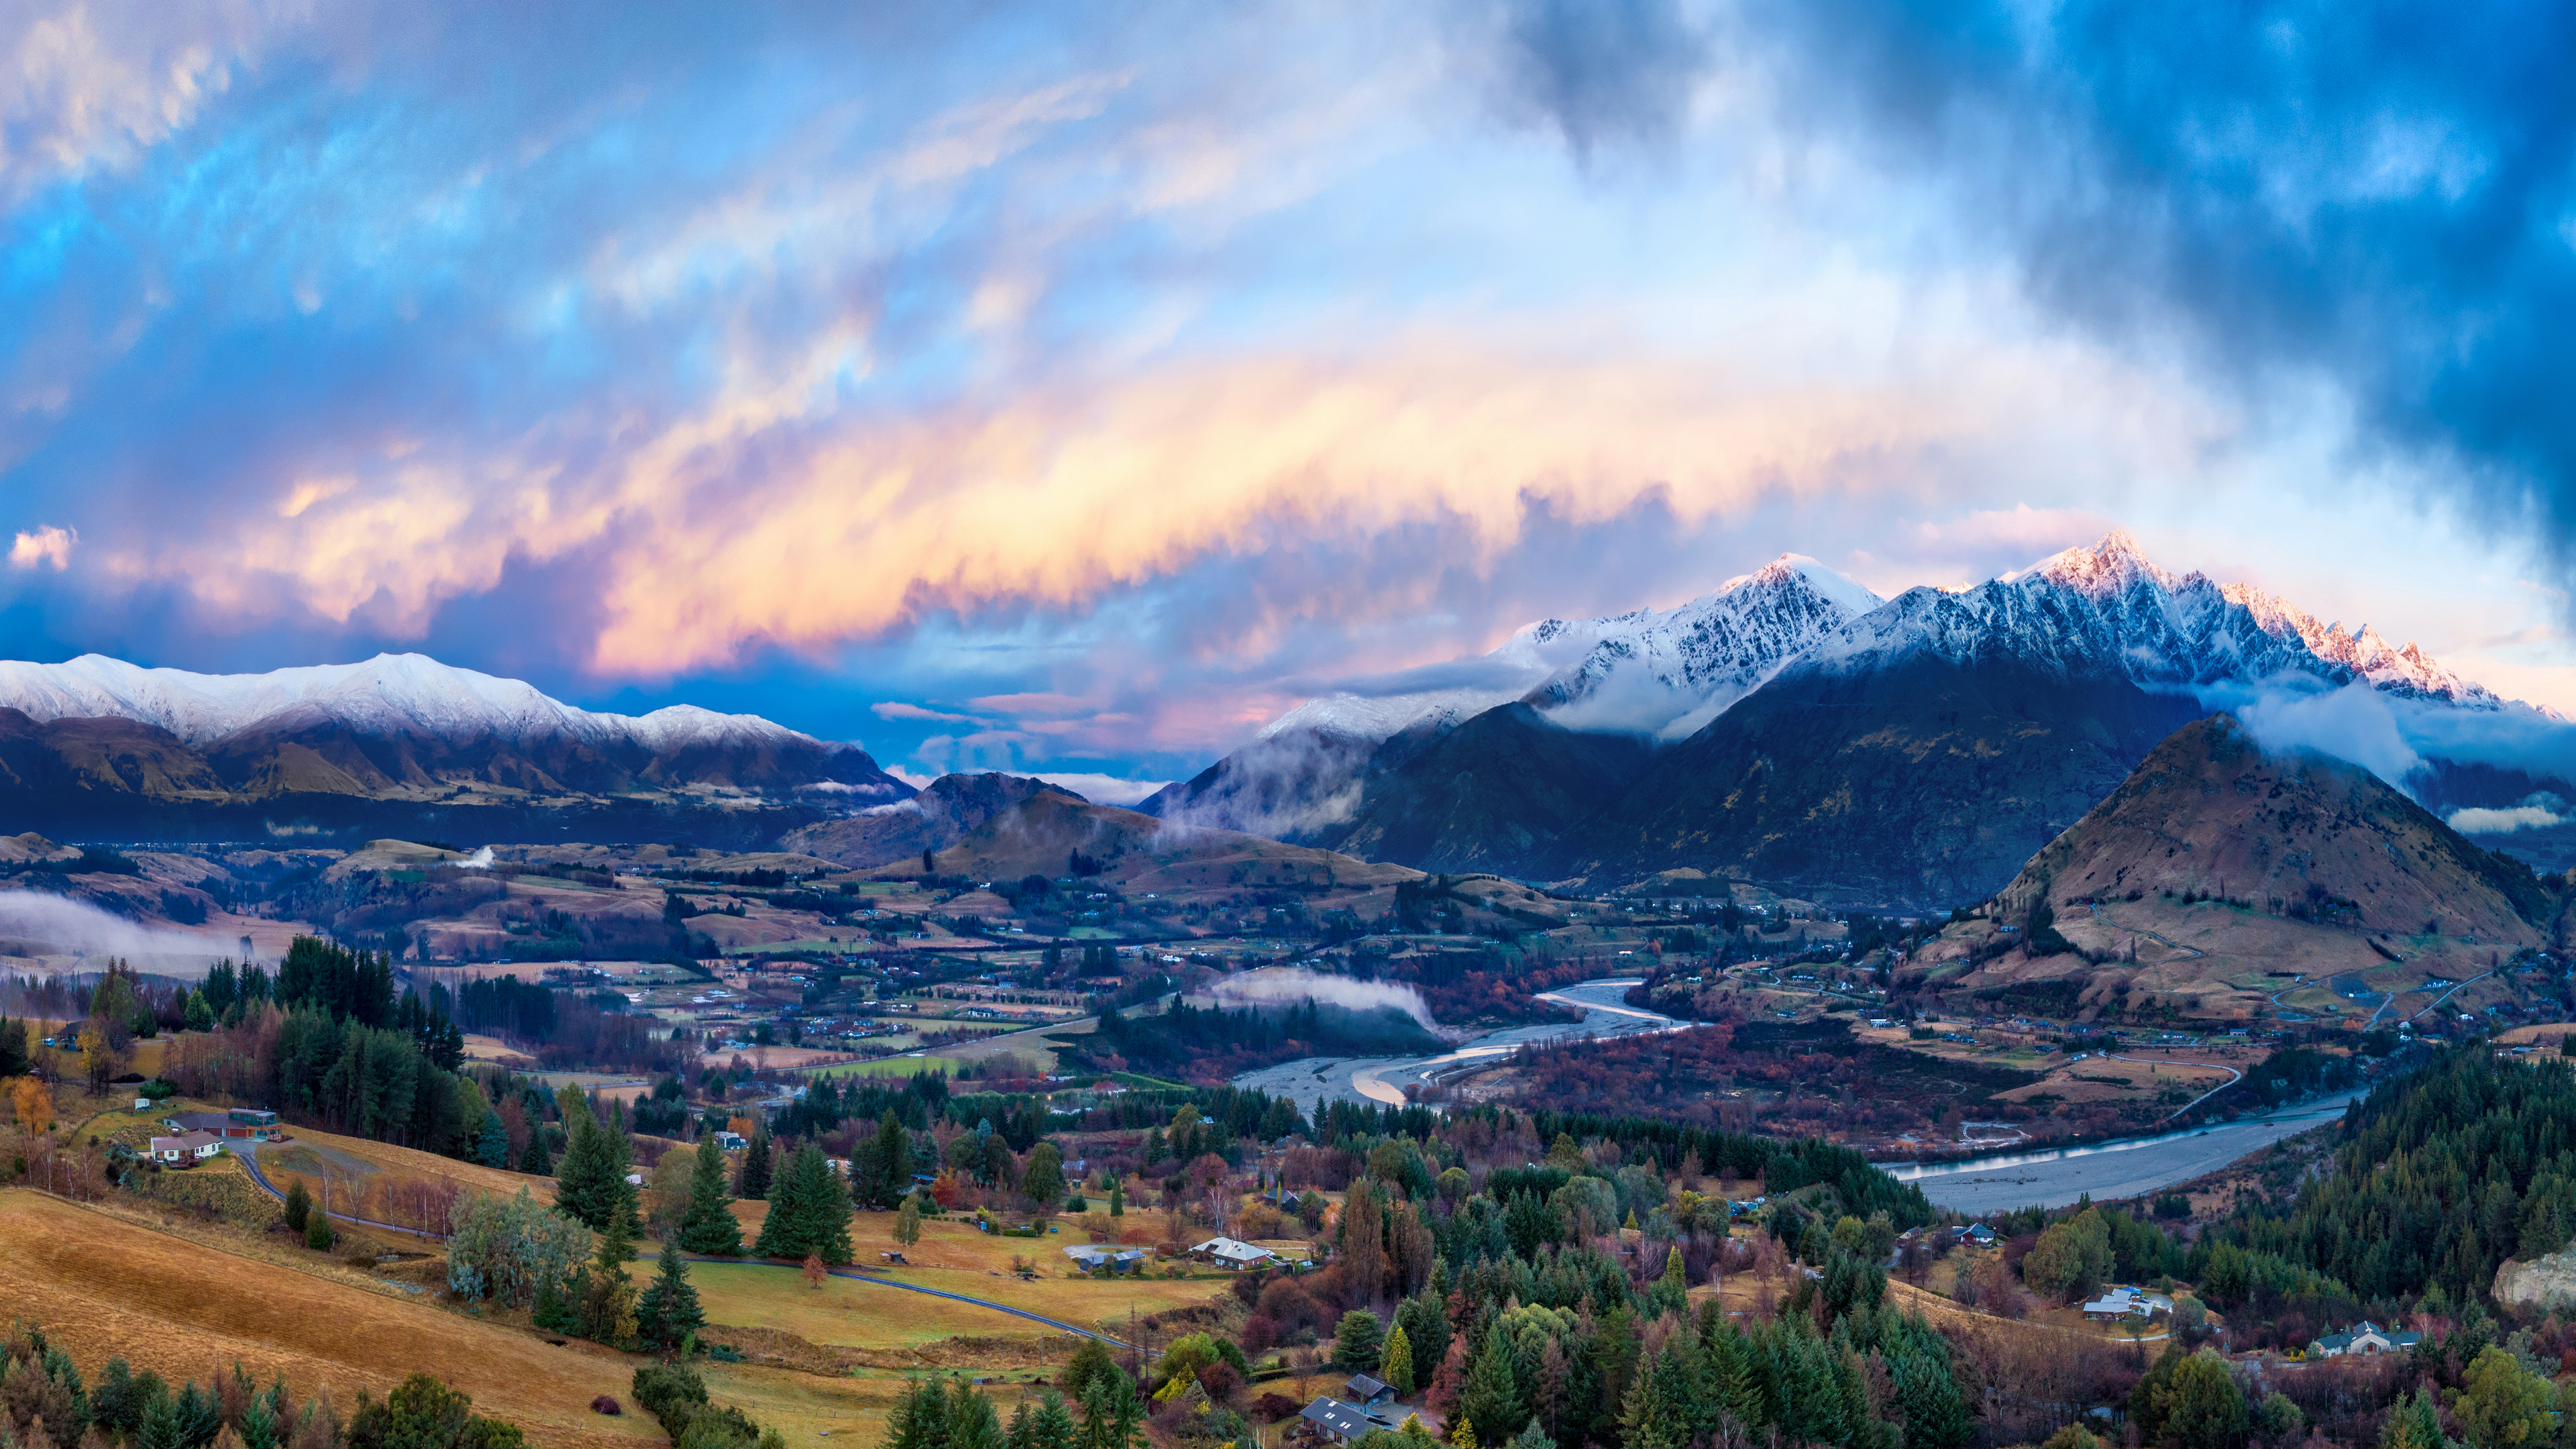 General 3840x2160 landscape 4K New Zealand nature mountains snow clouds sunset glow trees